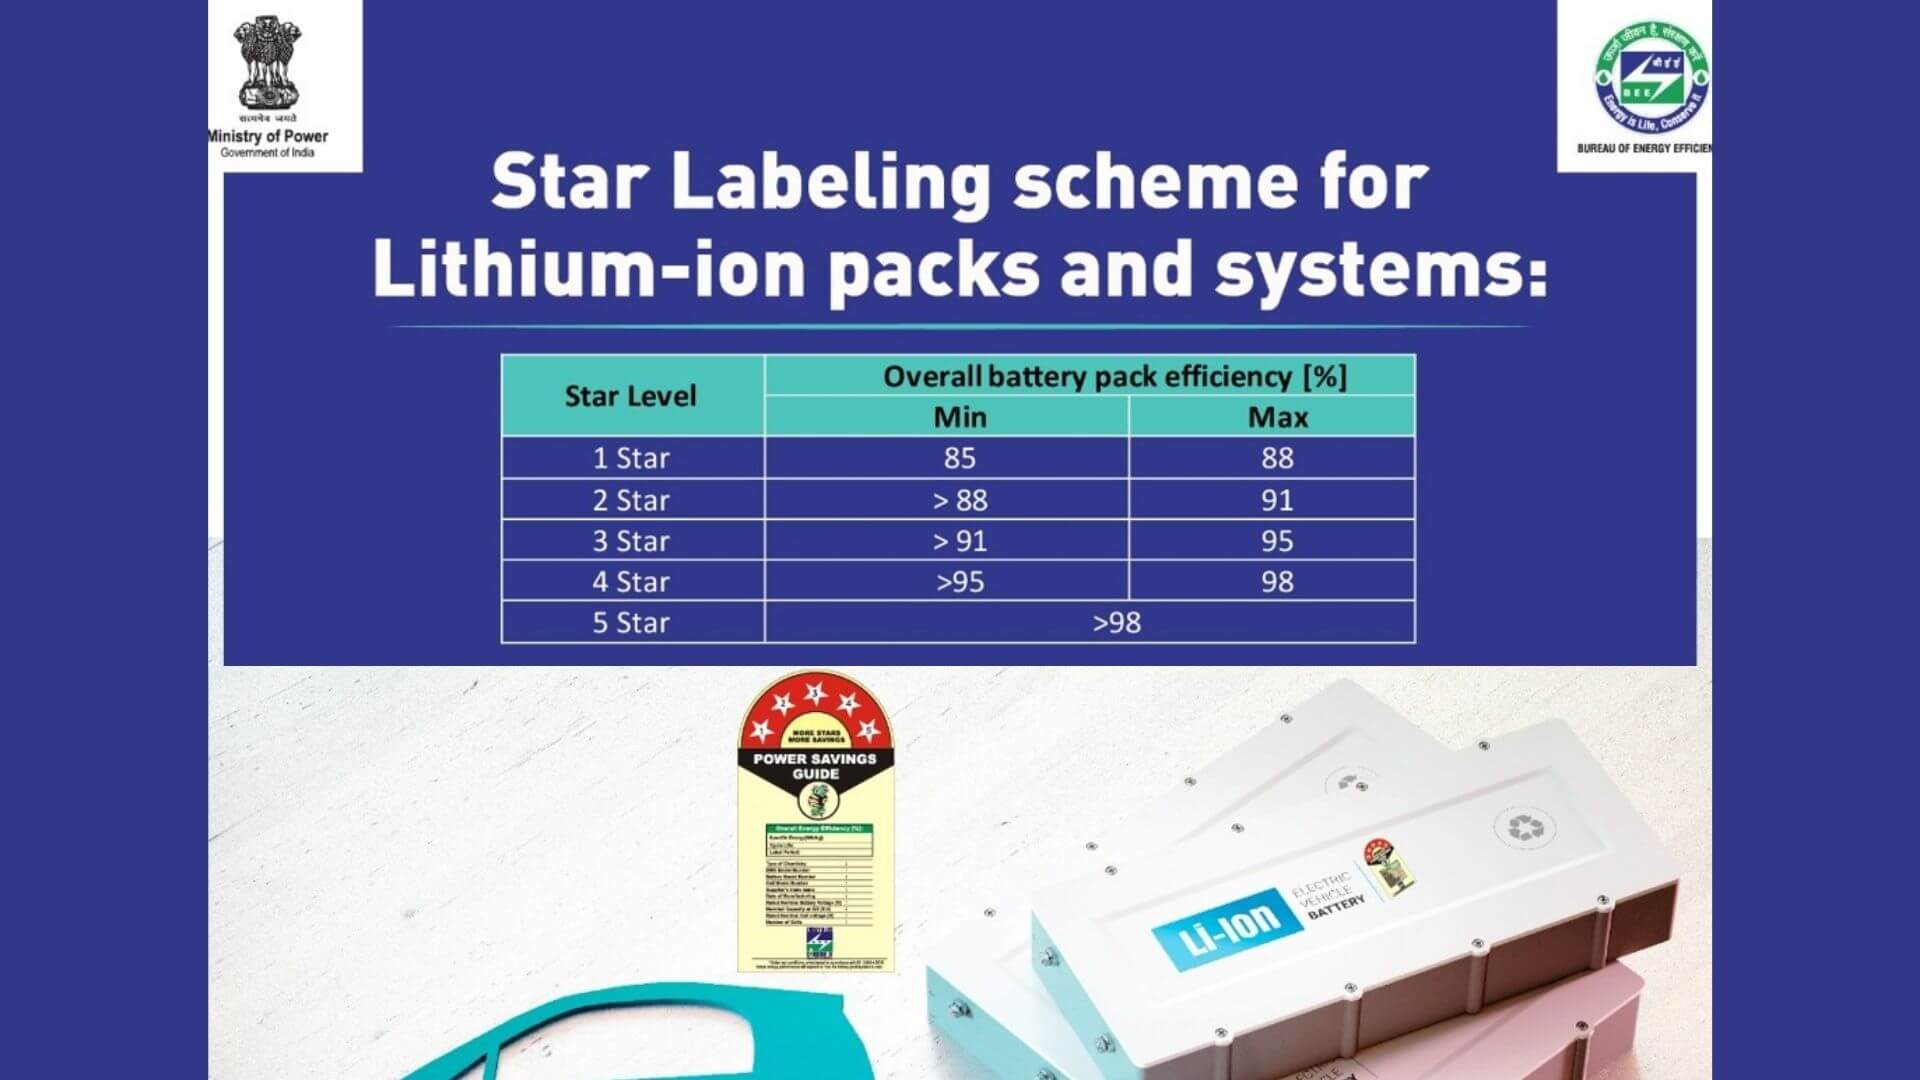 https://e-vehicleinfo.com/star-labeling-schemes-for-lithium-ion-packs-and-systems-bee-india/